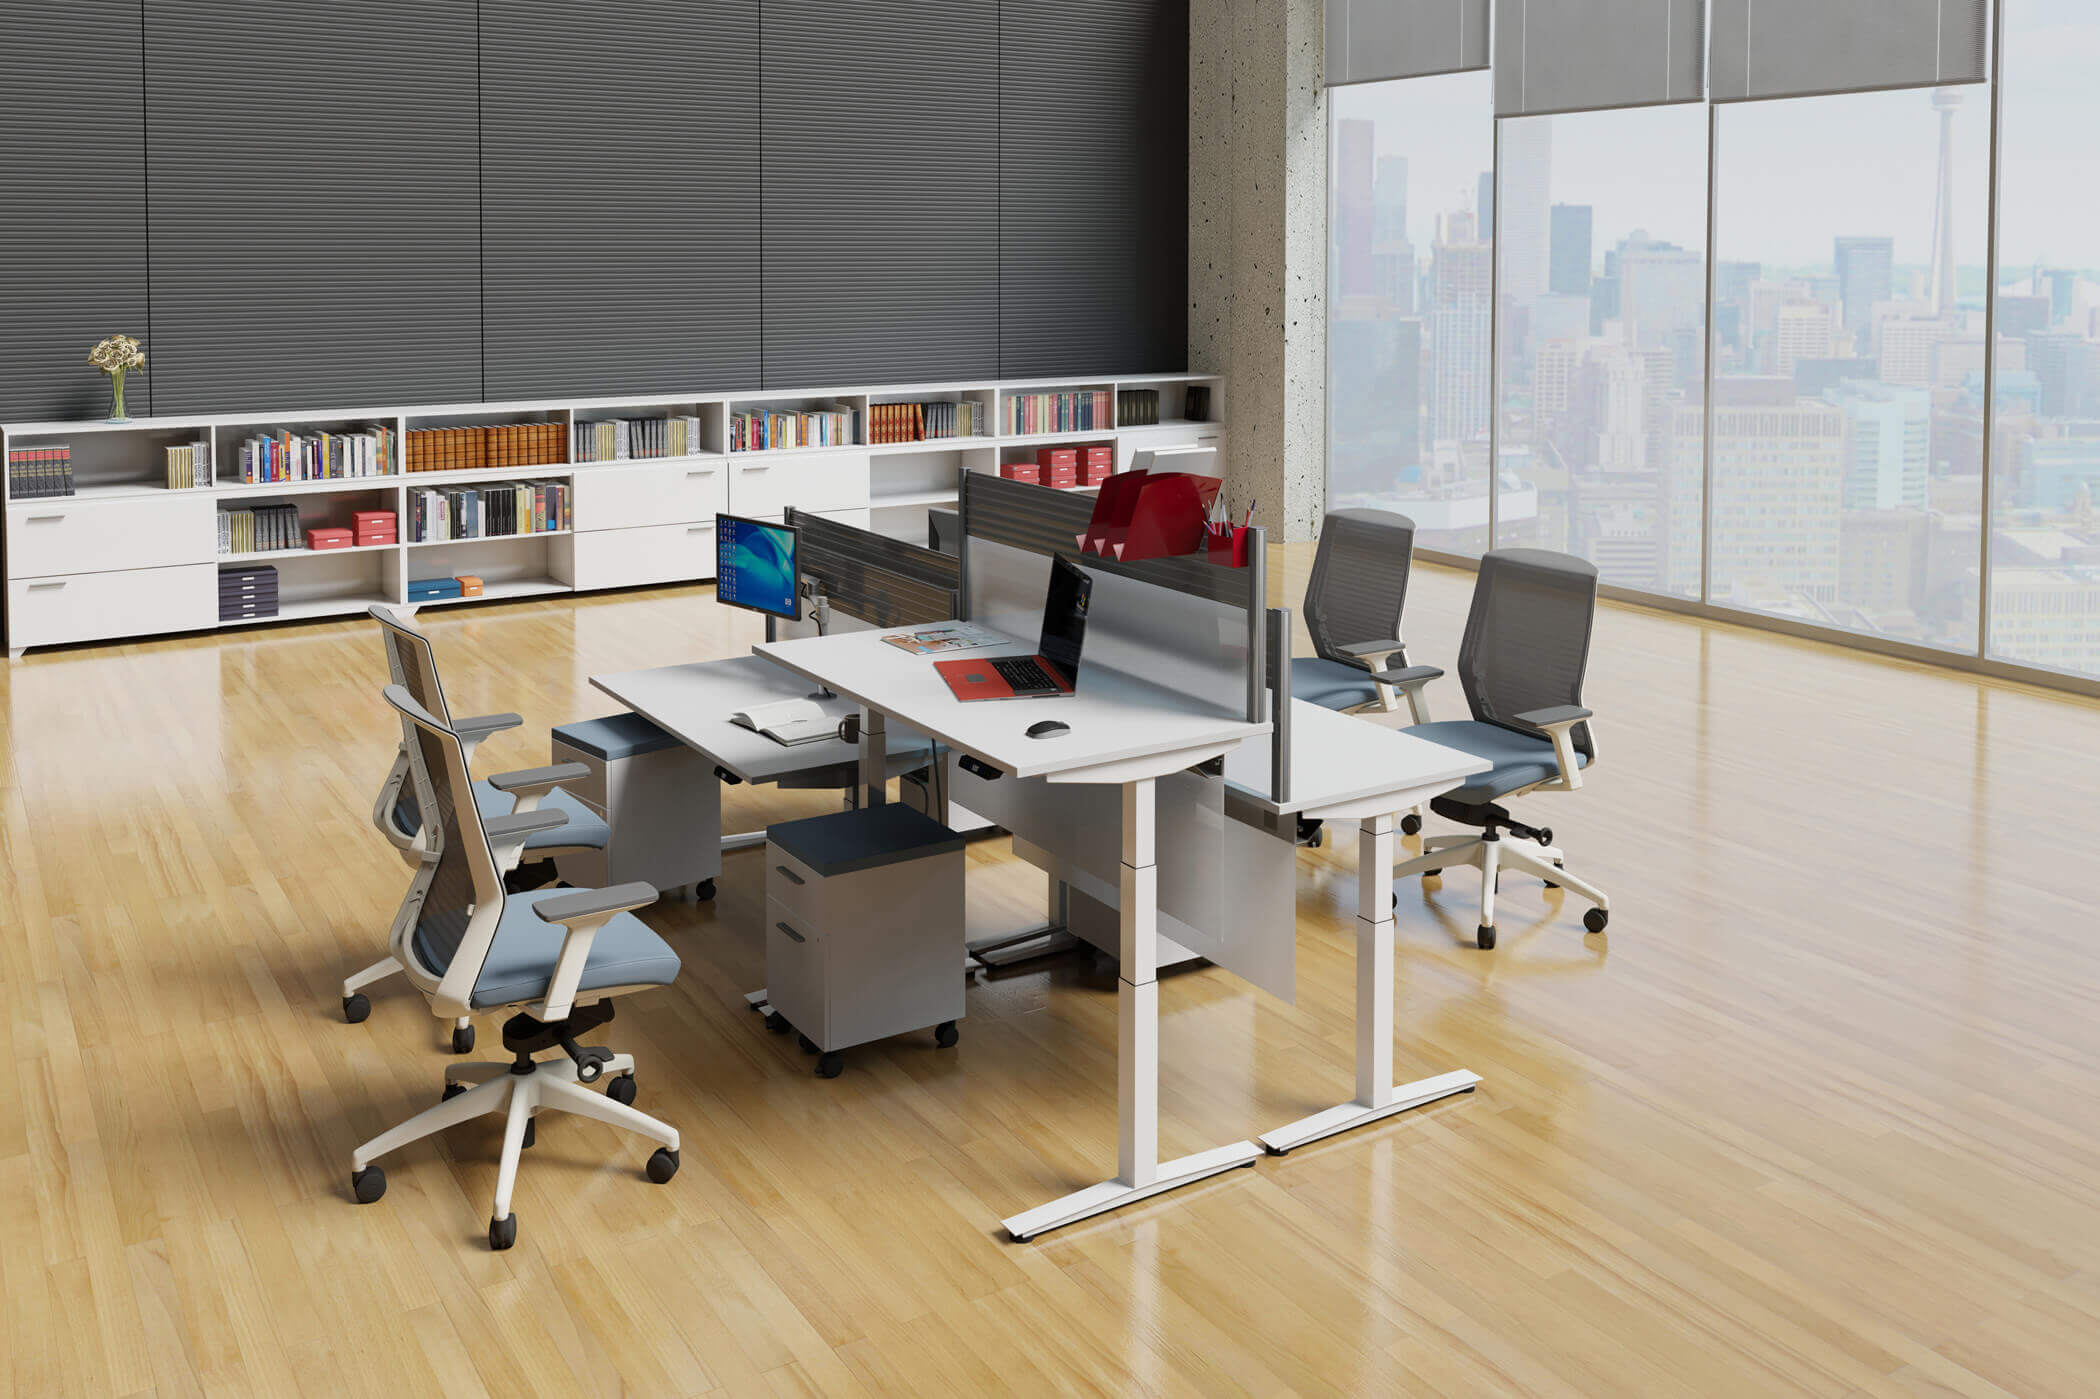 Office furniture supply and installation | Expert Guidance Matters: How Office Furniture Professionals Simplify Your Furniture Selection Process